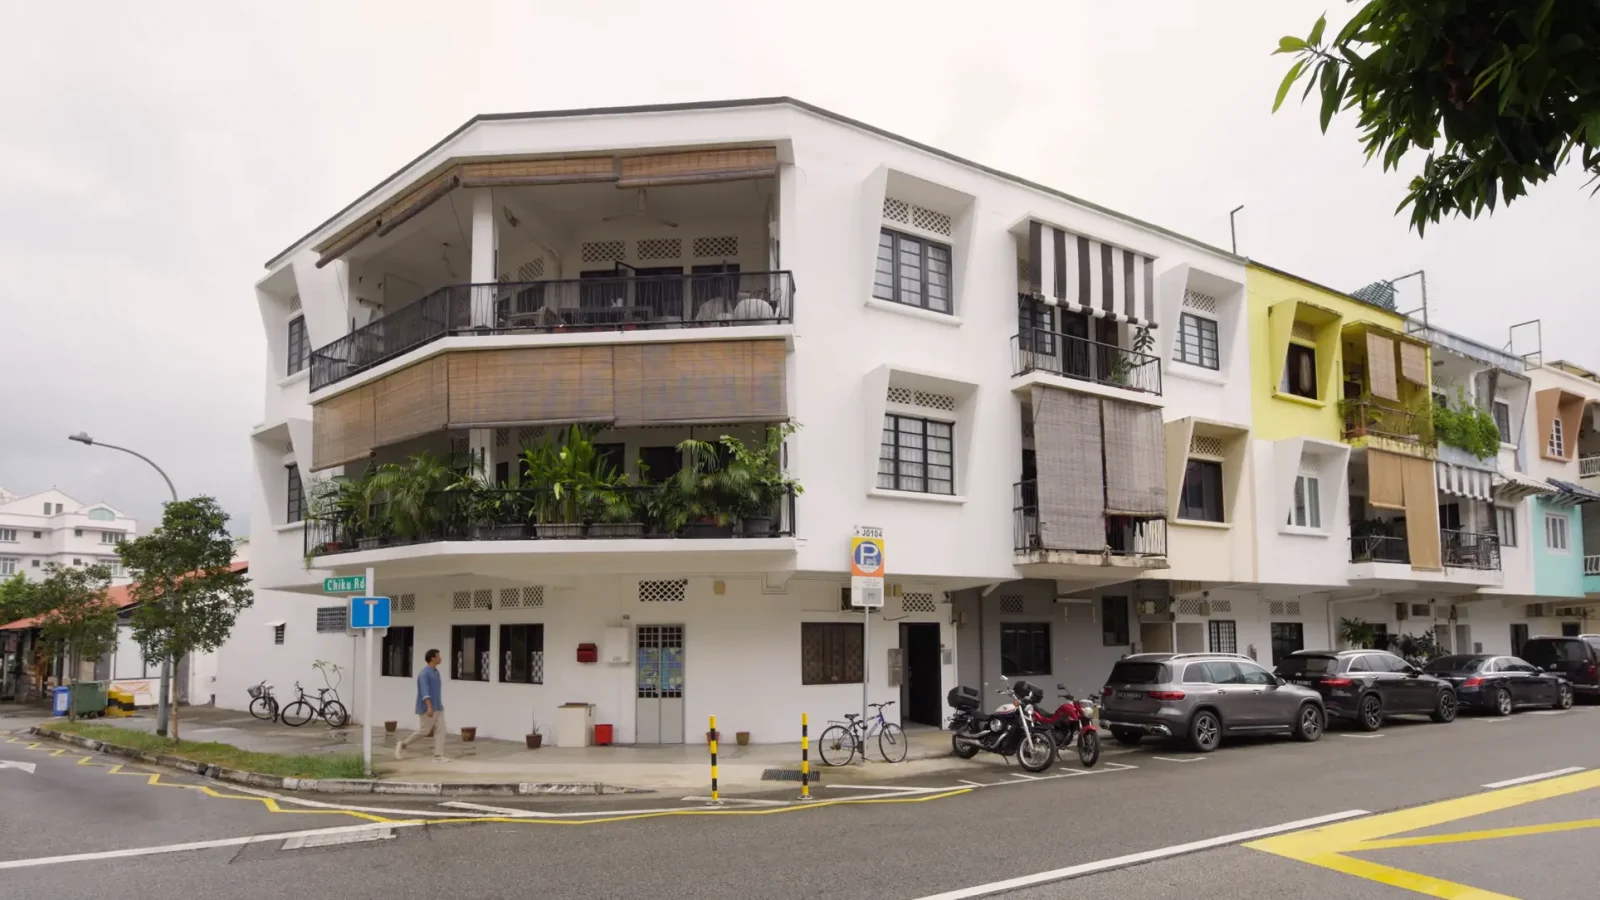 An Exclusive Tour Of Zubir Saids 1950s Home Where He Wrote Singapores National Anthem 4